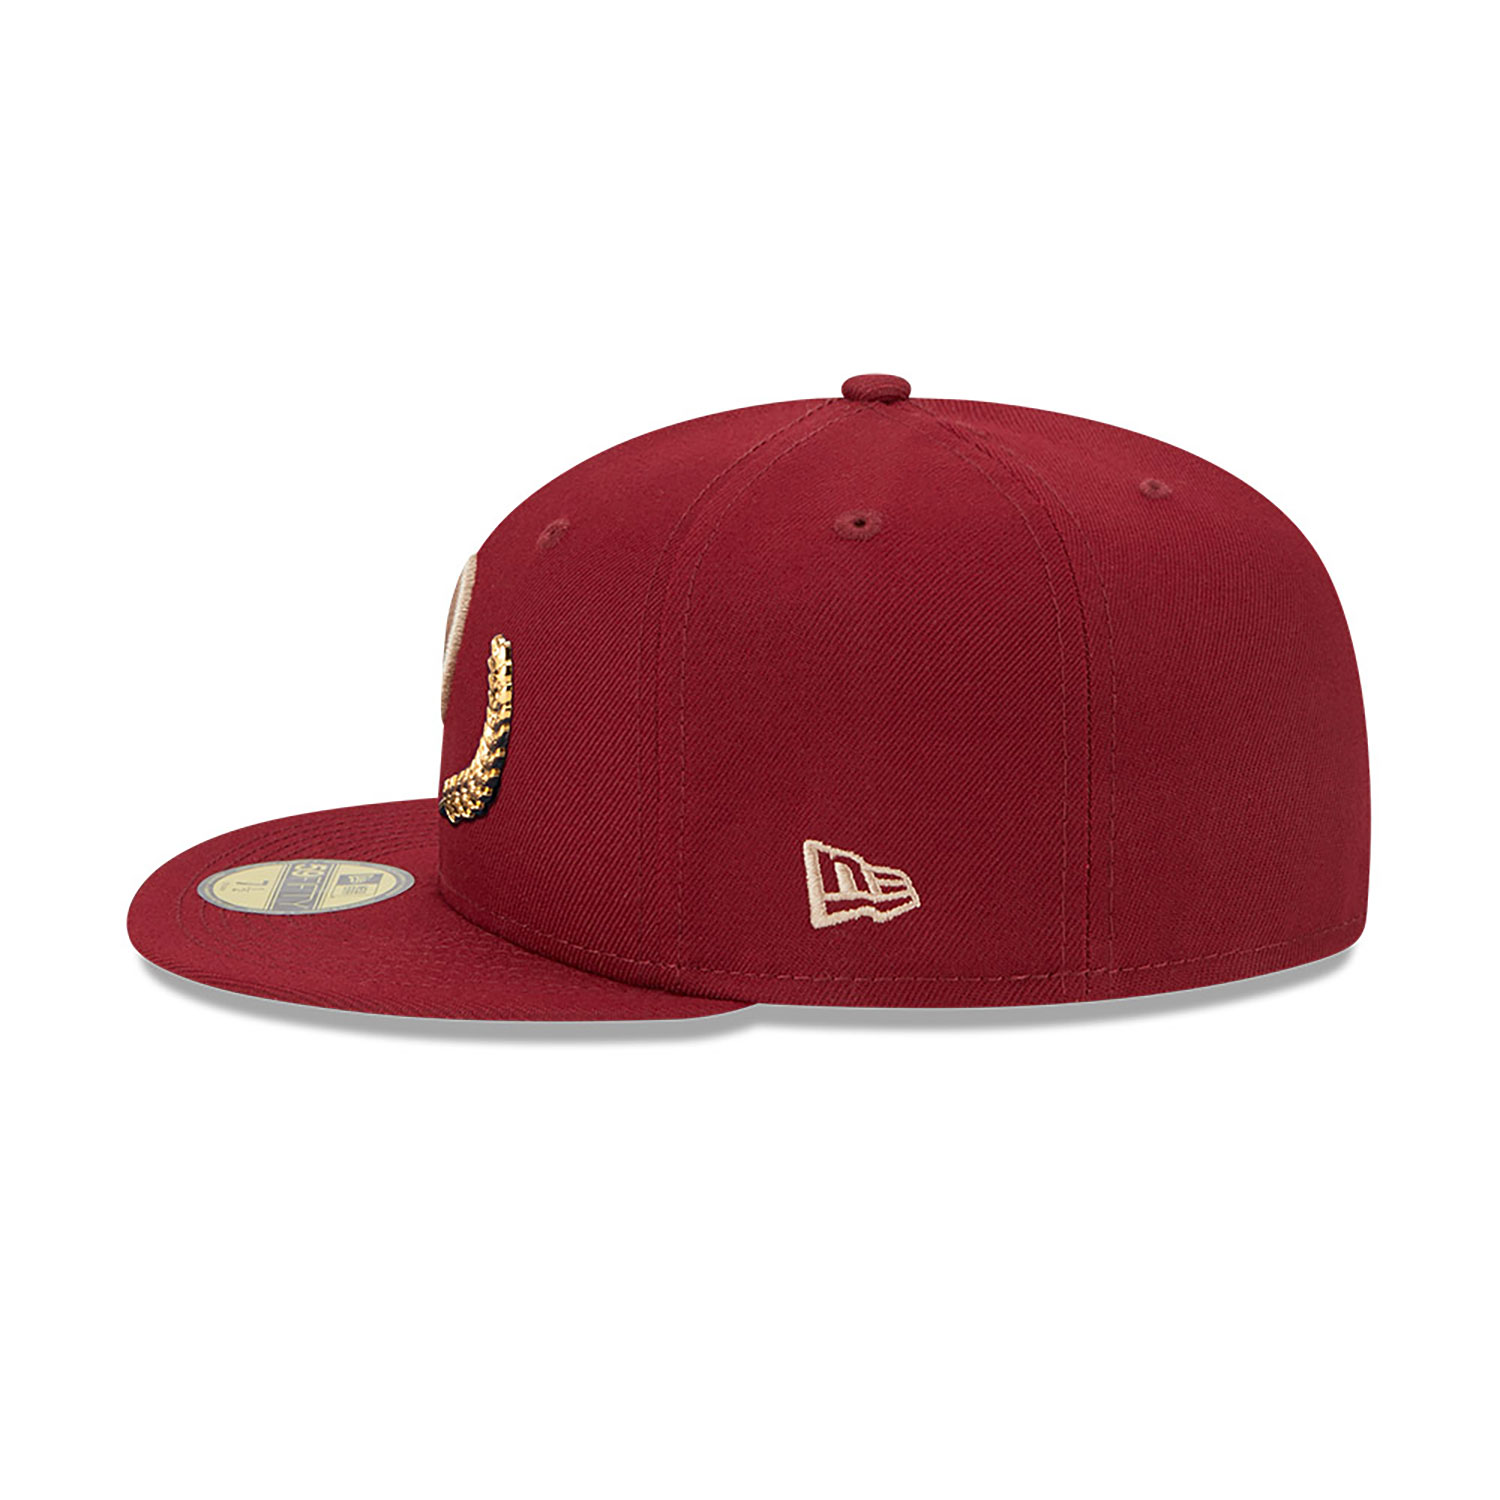 Philadelphia Phillies Gold Leaf Dark Red 59FIFTY Fitted Cap